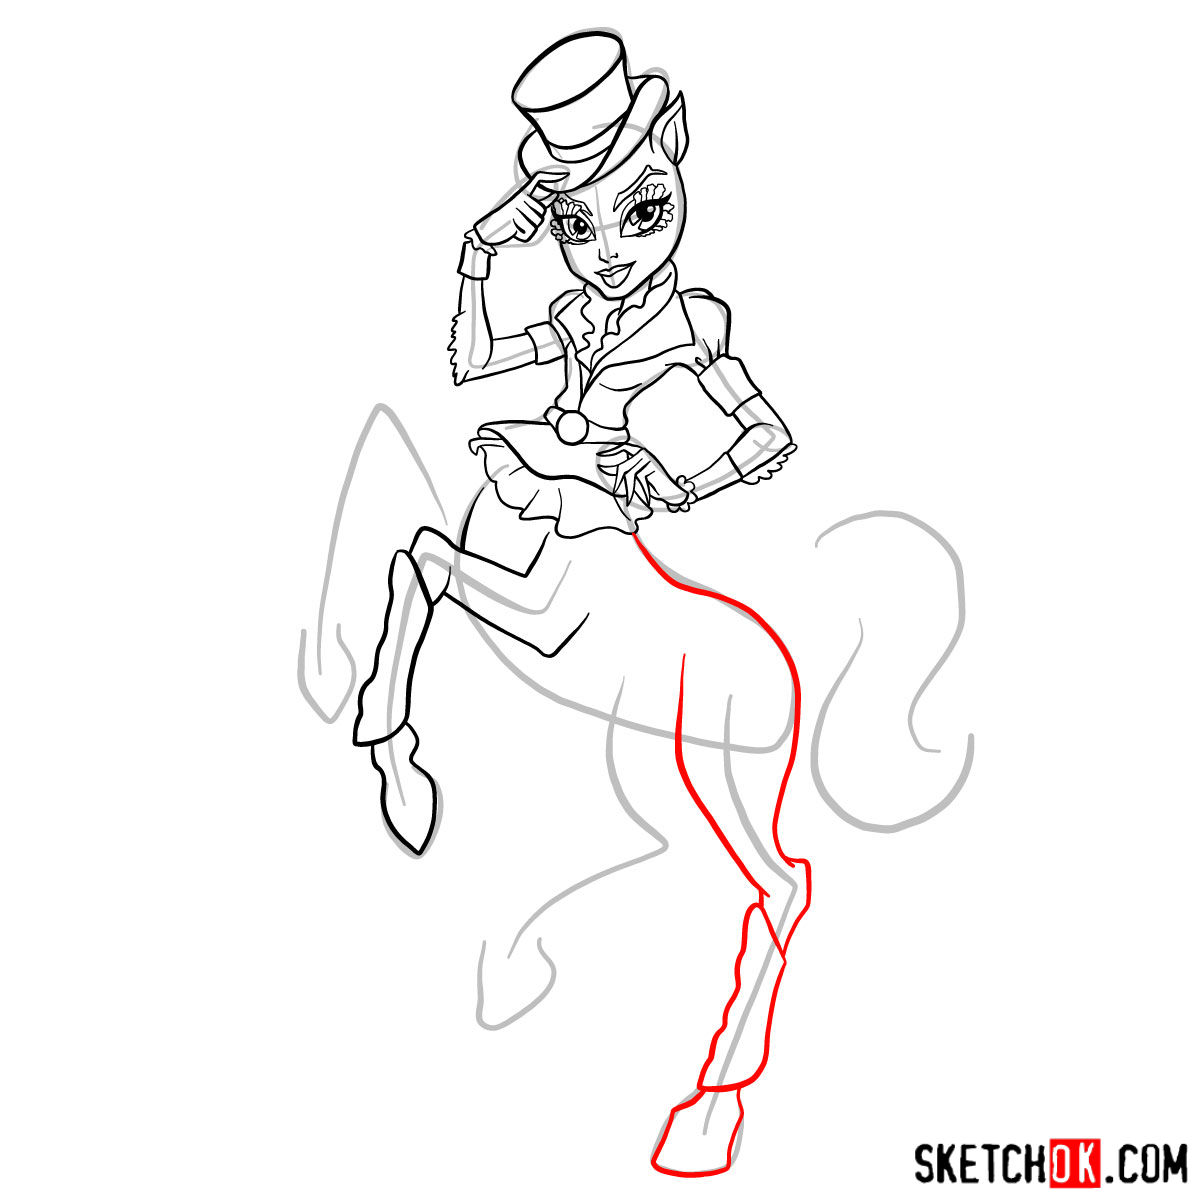 How to draw Avea Trotter - step 12